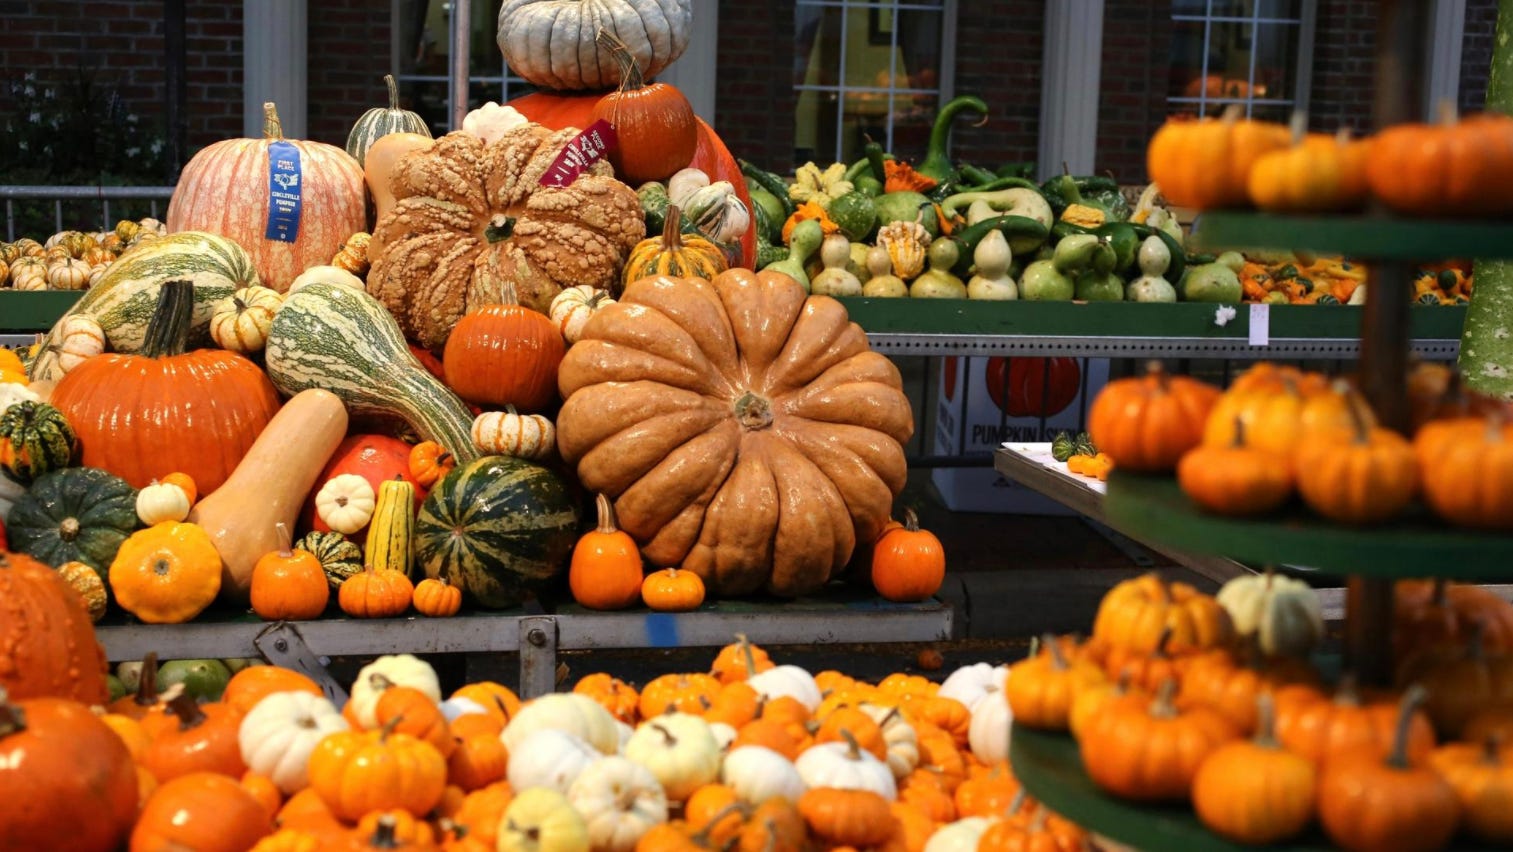 Circleville’s Pumpkin Show in October canceled due to pandemic